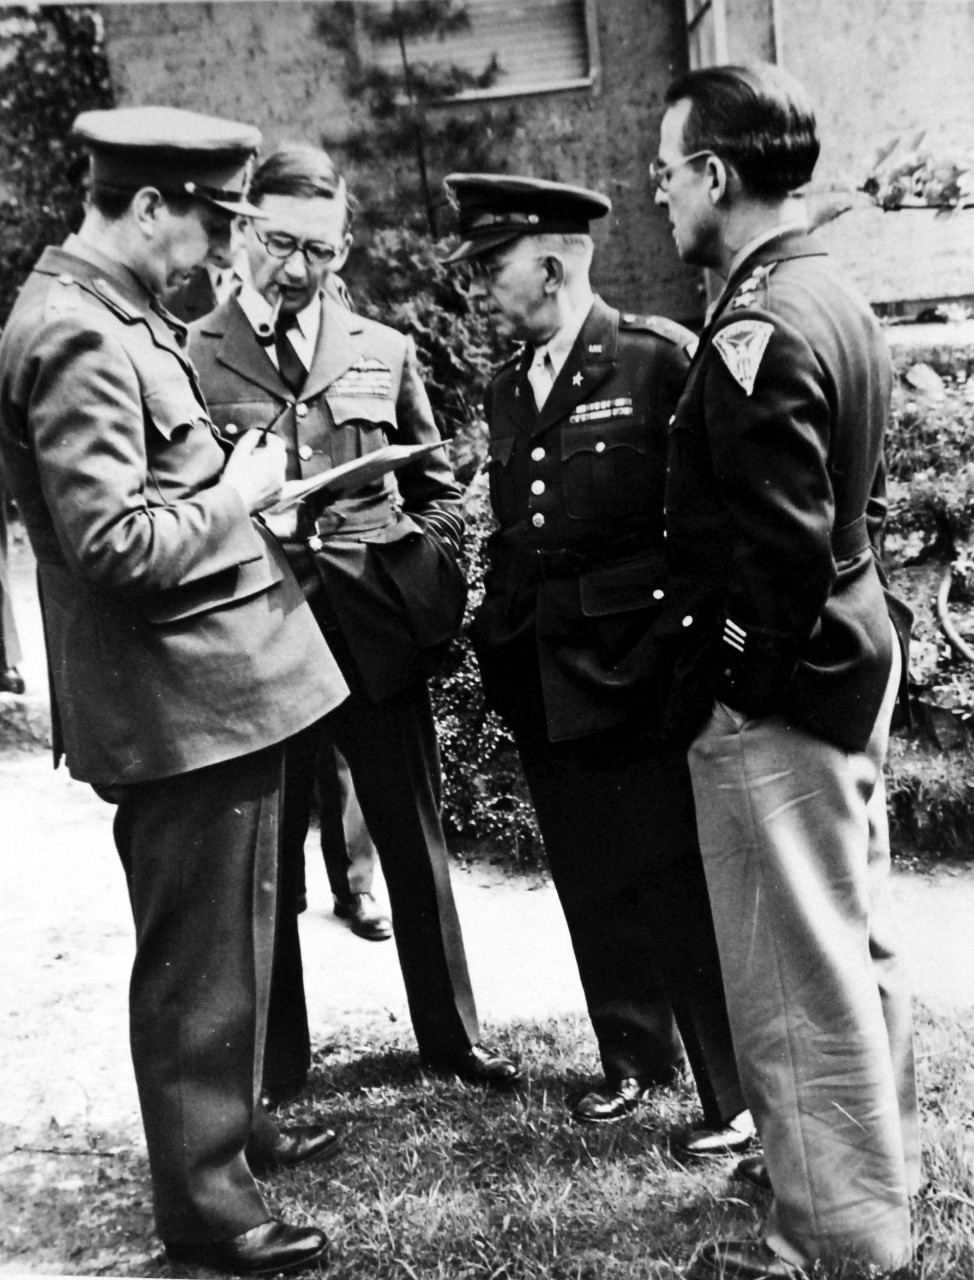 111-SC-27433: Surrender of Germany, 7 May 1945. Studying revised surrender terms at Russian Headquarters are left to right: Major General K.W.D. Strong; Air Chief Marshall Sir Arthur Tedder, Deputy Supreme Commander; Major General H.R. Bull, G-3; and Major General John R. Deane, CG, SHAEF Mission to Moscow, ratifies surrender terms were agreed upon at Reims, France, earlier in the week.  U.S. Army Photograph.  Courtesy of the Library of Congress Collection, Lot-8988. (2015/10/16).